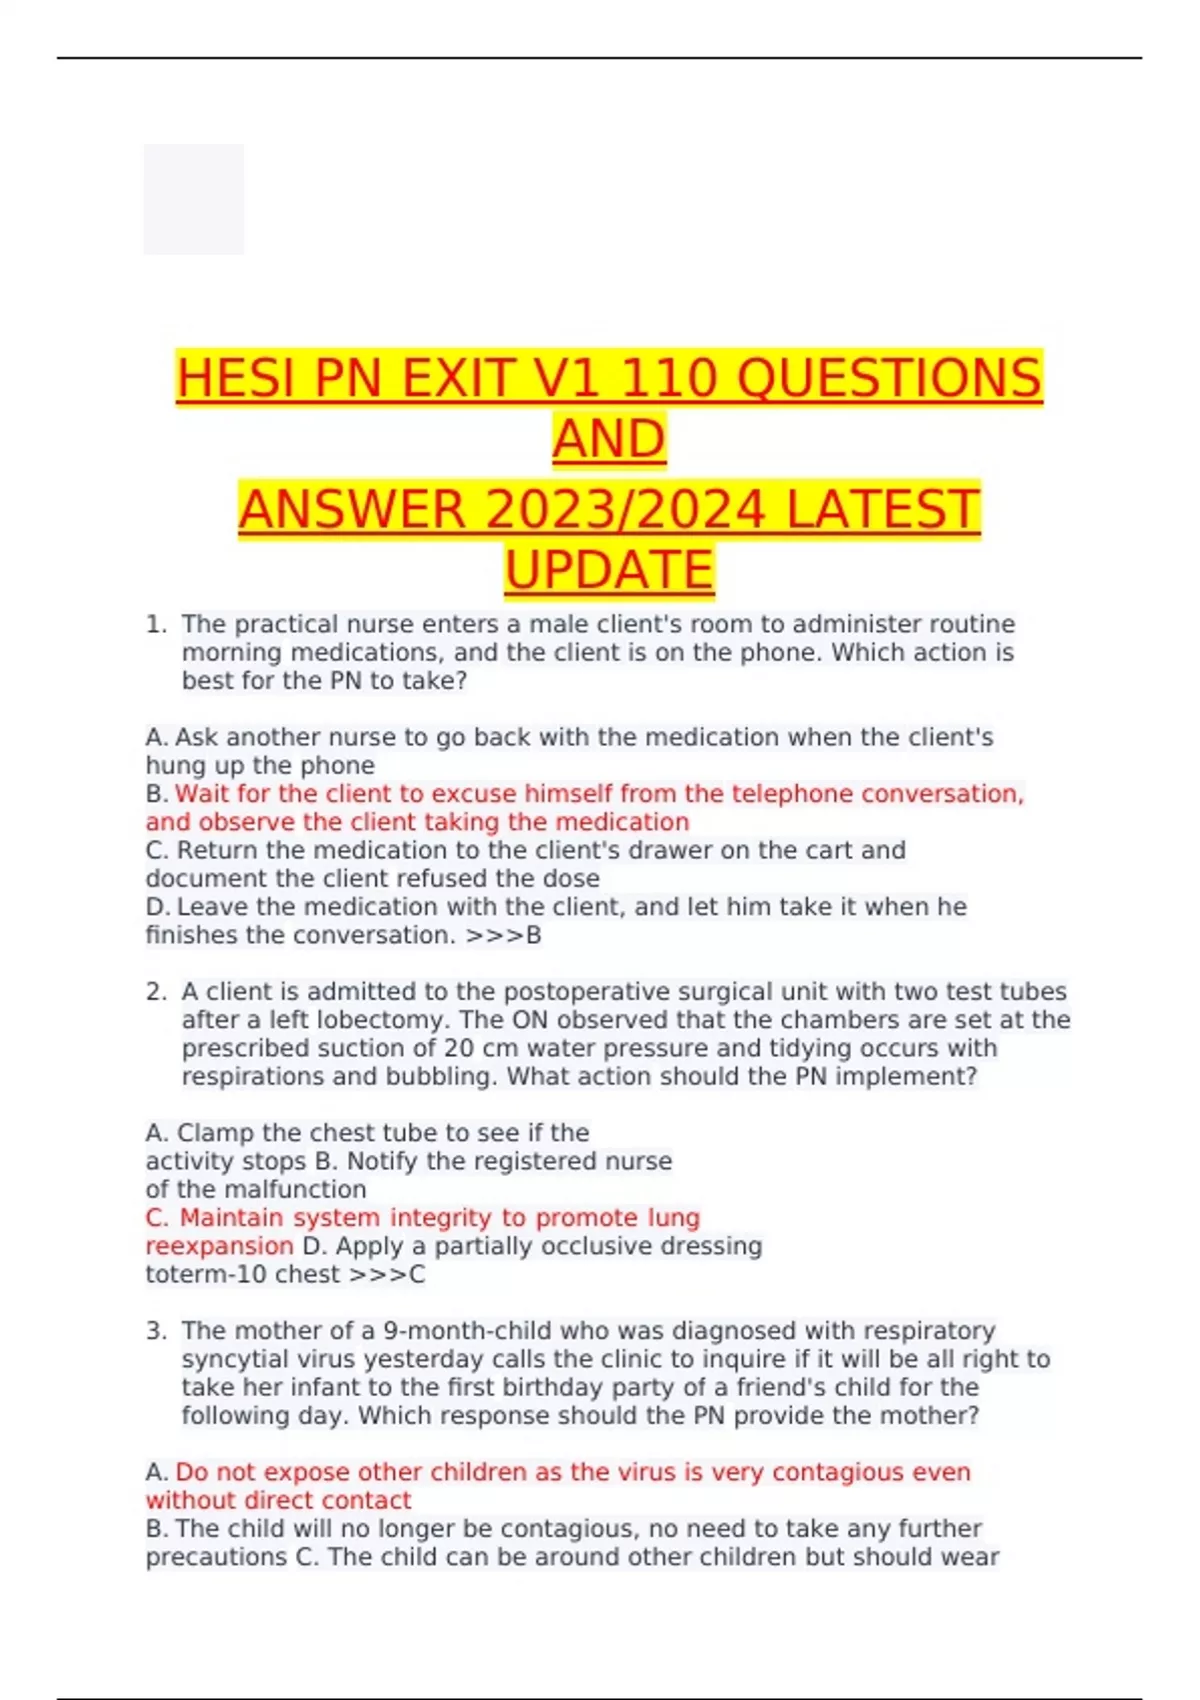 HESI PN EXIT V1 110 QUESTIONS AND ANSWER 2023/2024 LATEST UPDATE HESI